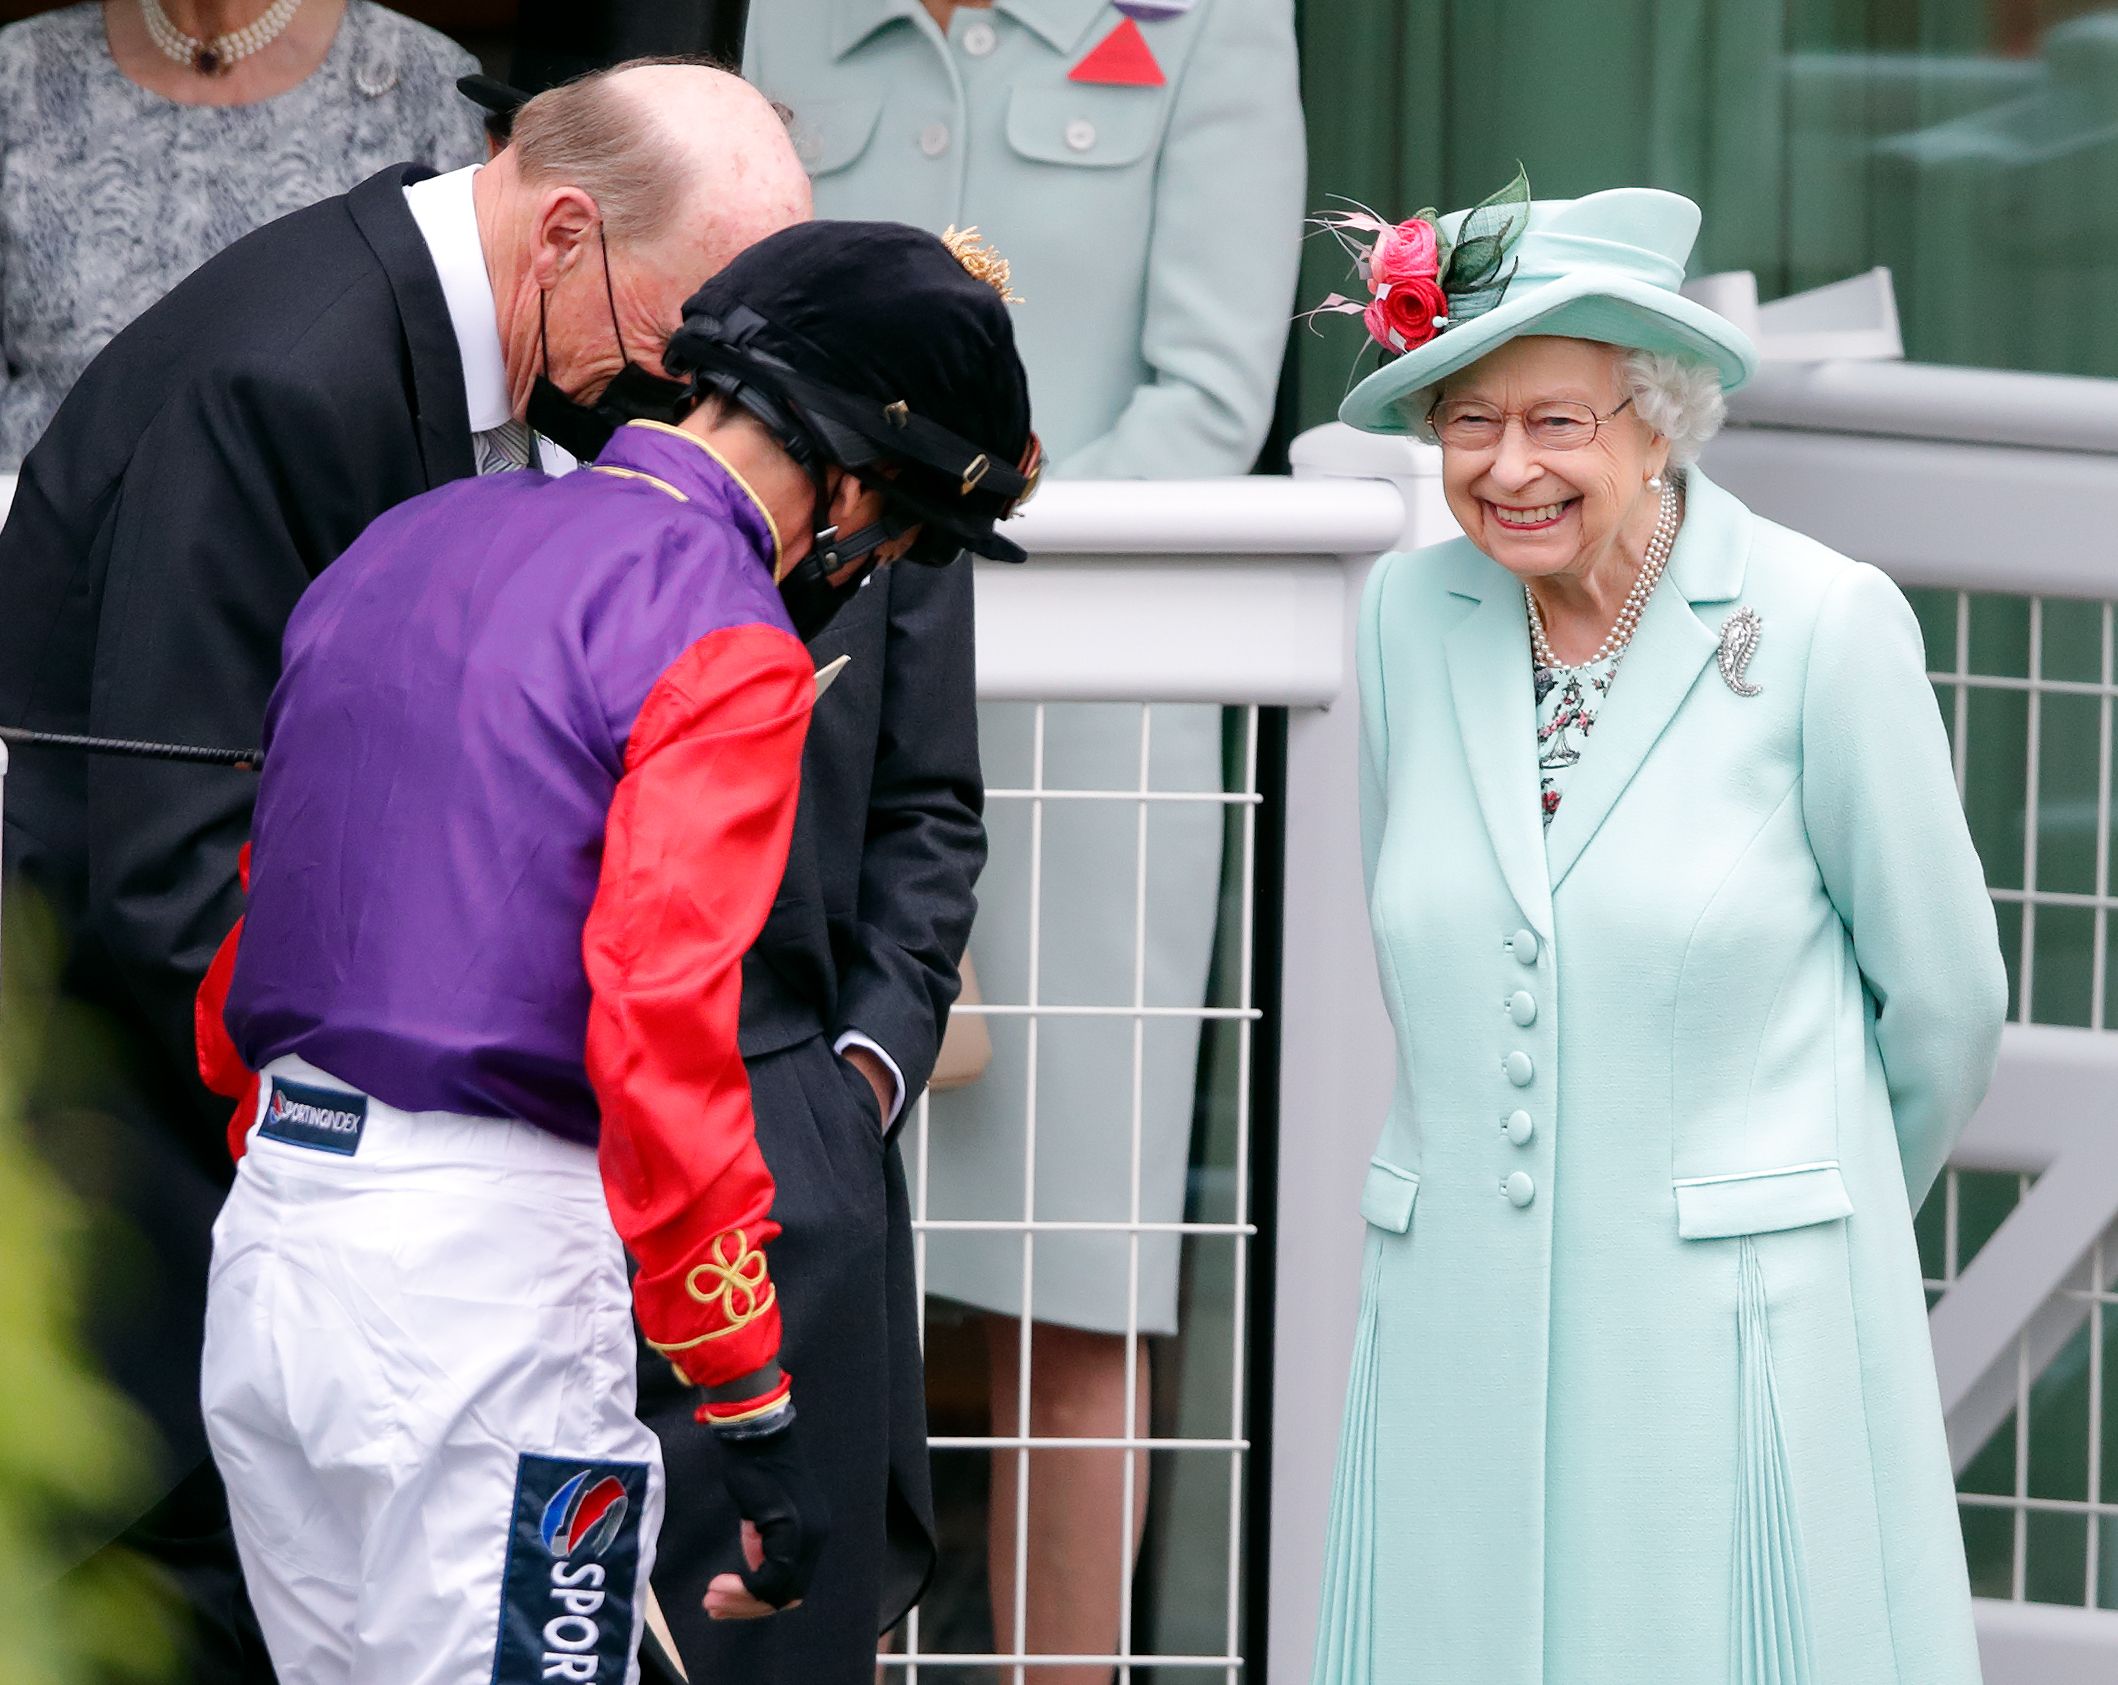 All the Pictures of the Royal Family at the 2021 Royal Ascot